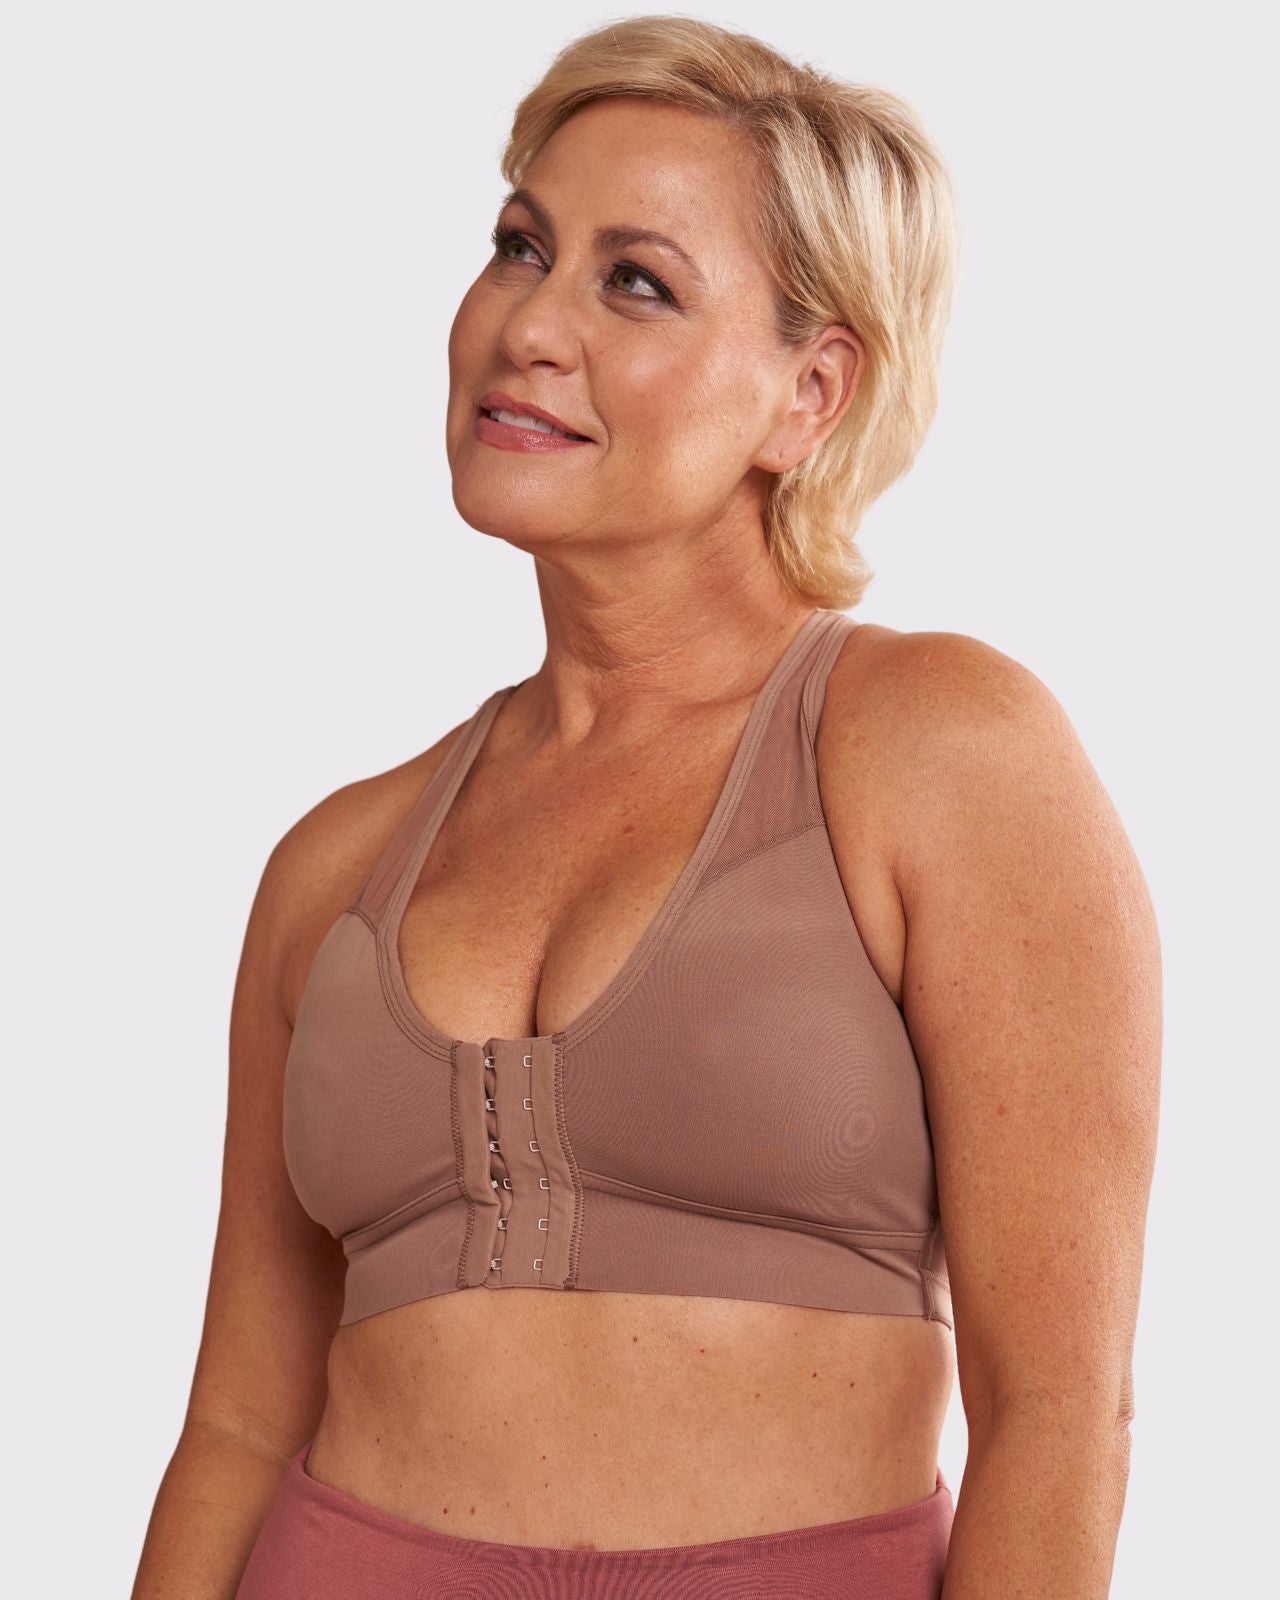 Aristelle, Speaking of @anaonointimates have you met Bianca yet? NEW! The  Bianca Post-Surgical Sports Bra is a fantastic front close option that o